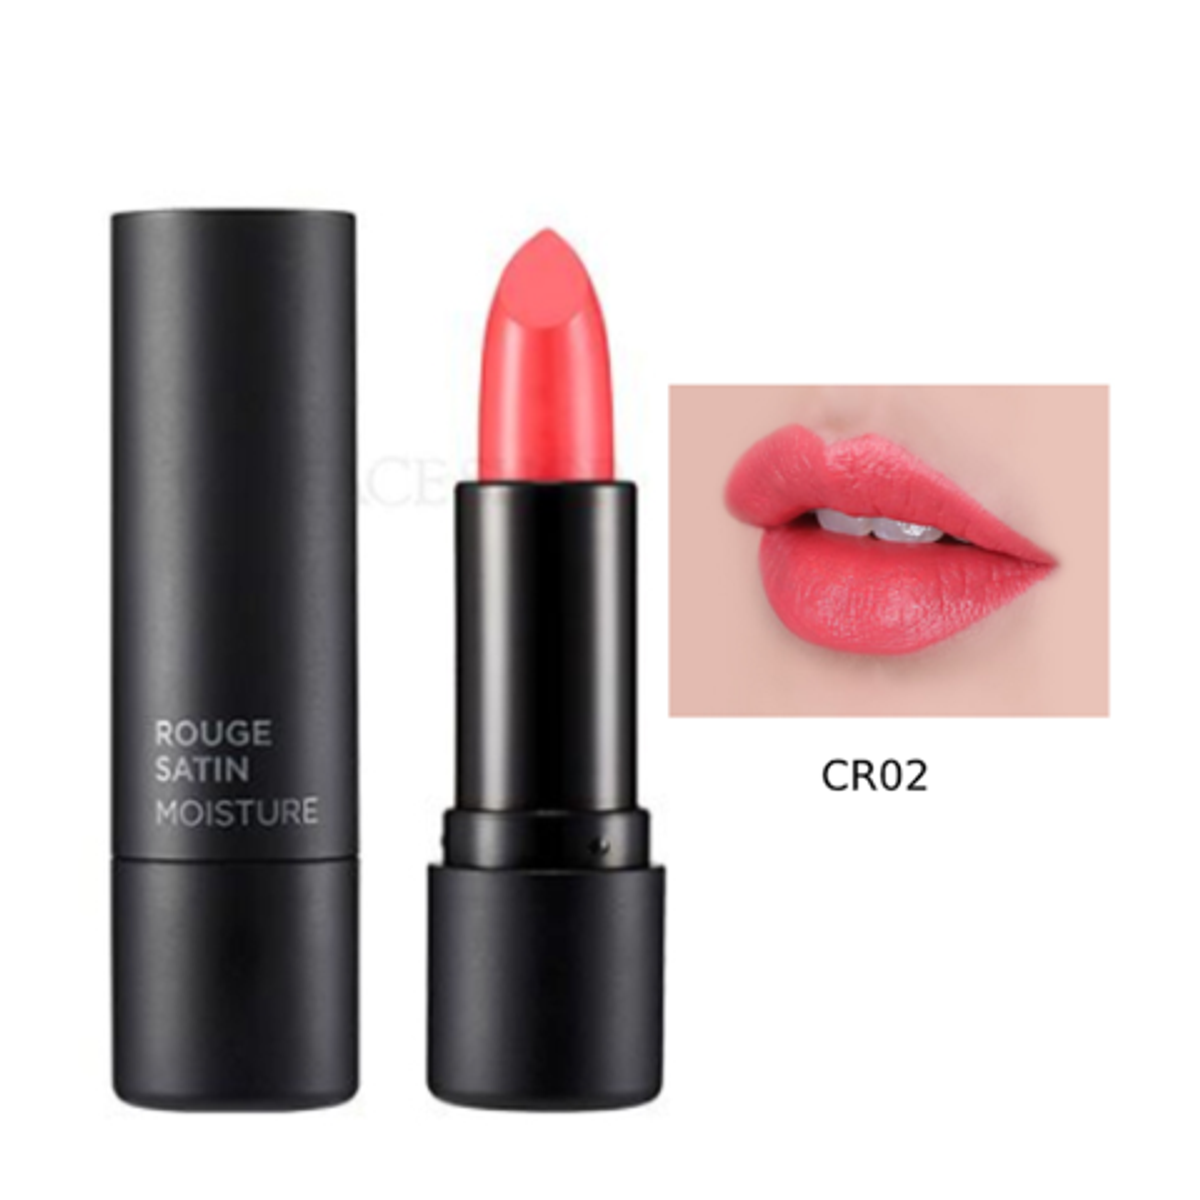 gift-fmgt-son-thoi-duong-am-rouge-satin-moisture-3-6g-cr02-kiss-the-coral-1